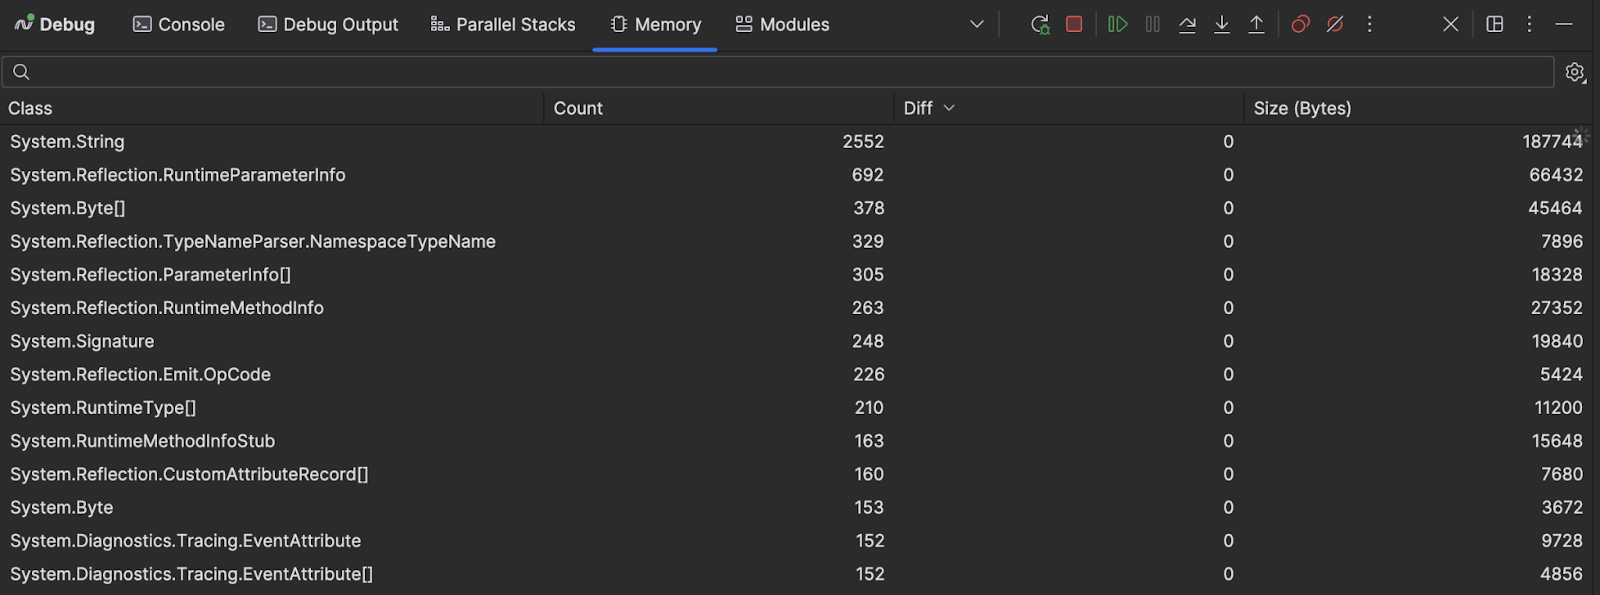 Memory view with a set of data.